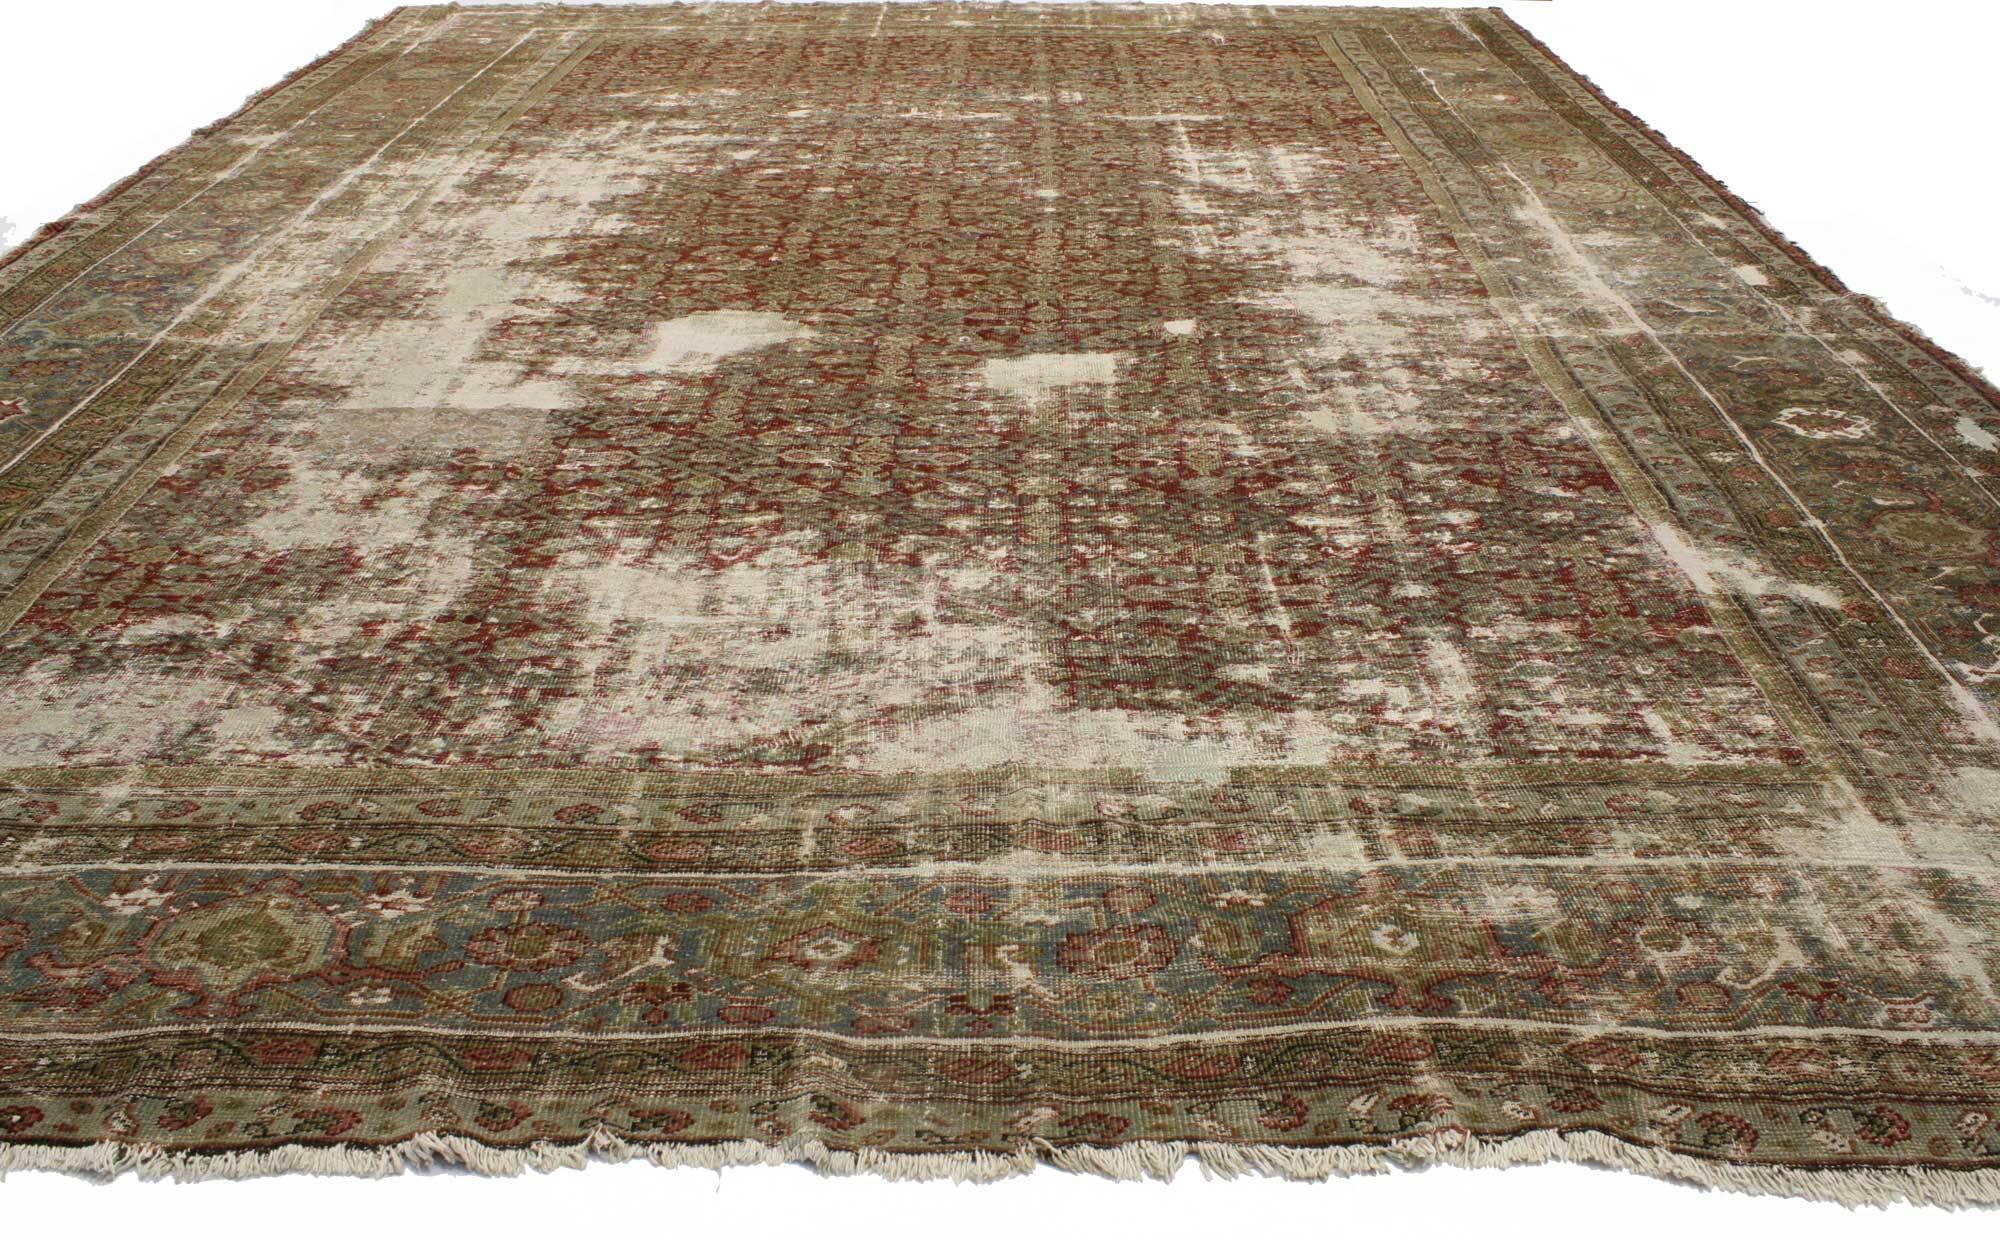 Hand-Knotted Antique-Worn Persian Sultanabad Rug, Weathered Beauty Meets Rustic Adirondack  For Sale